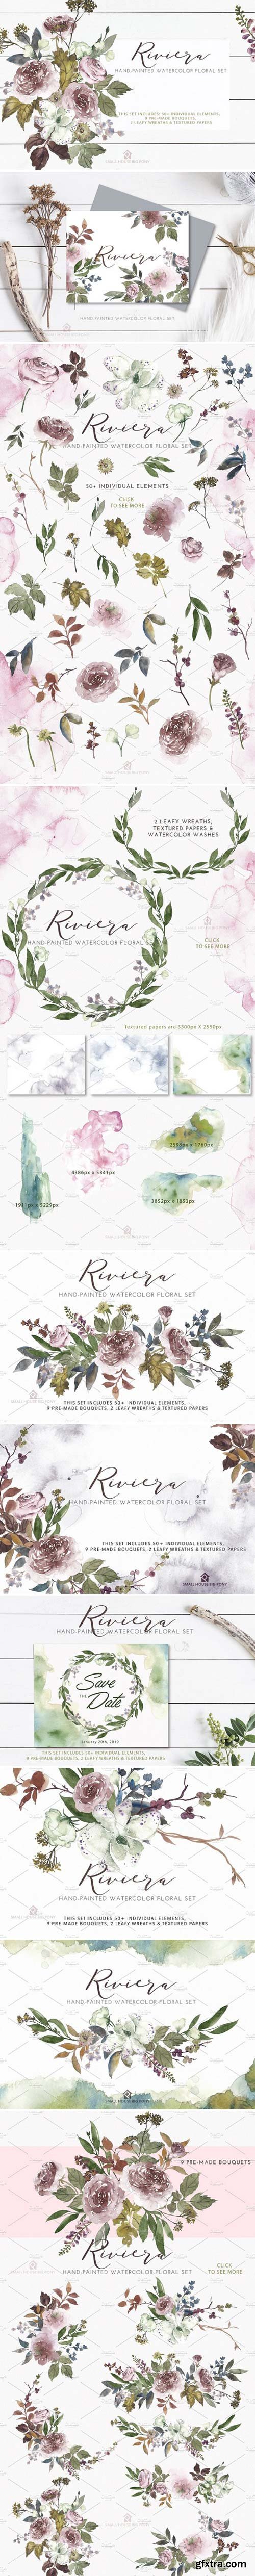 CM - Riviera - Hand-painted Watercolor 2257837